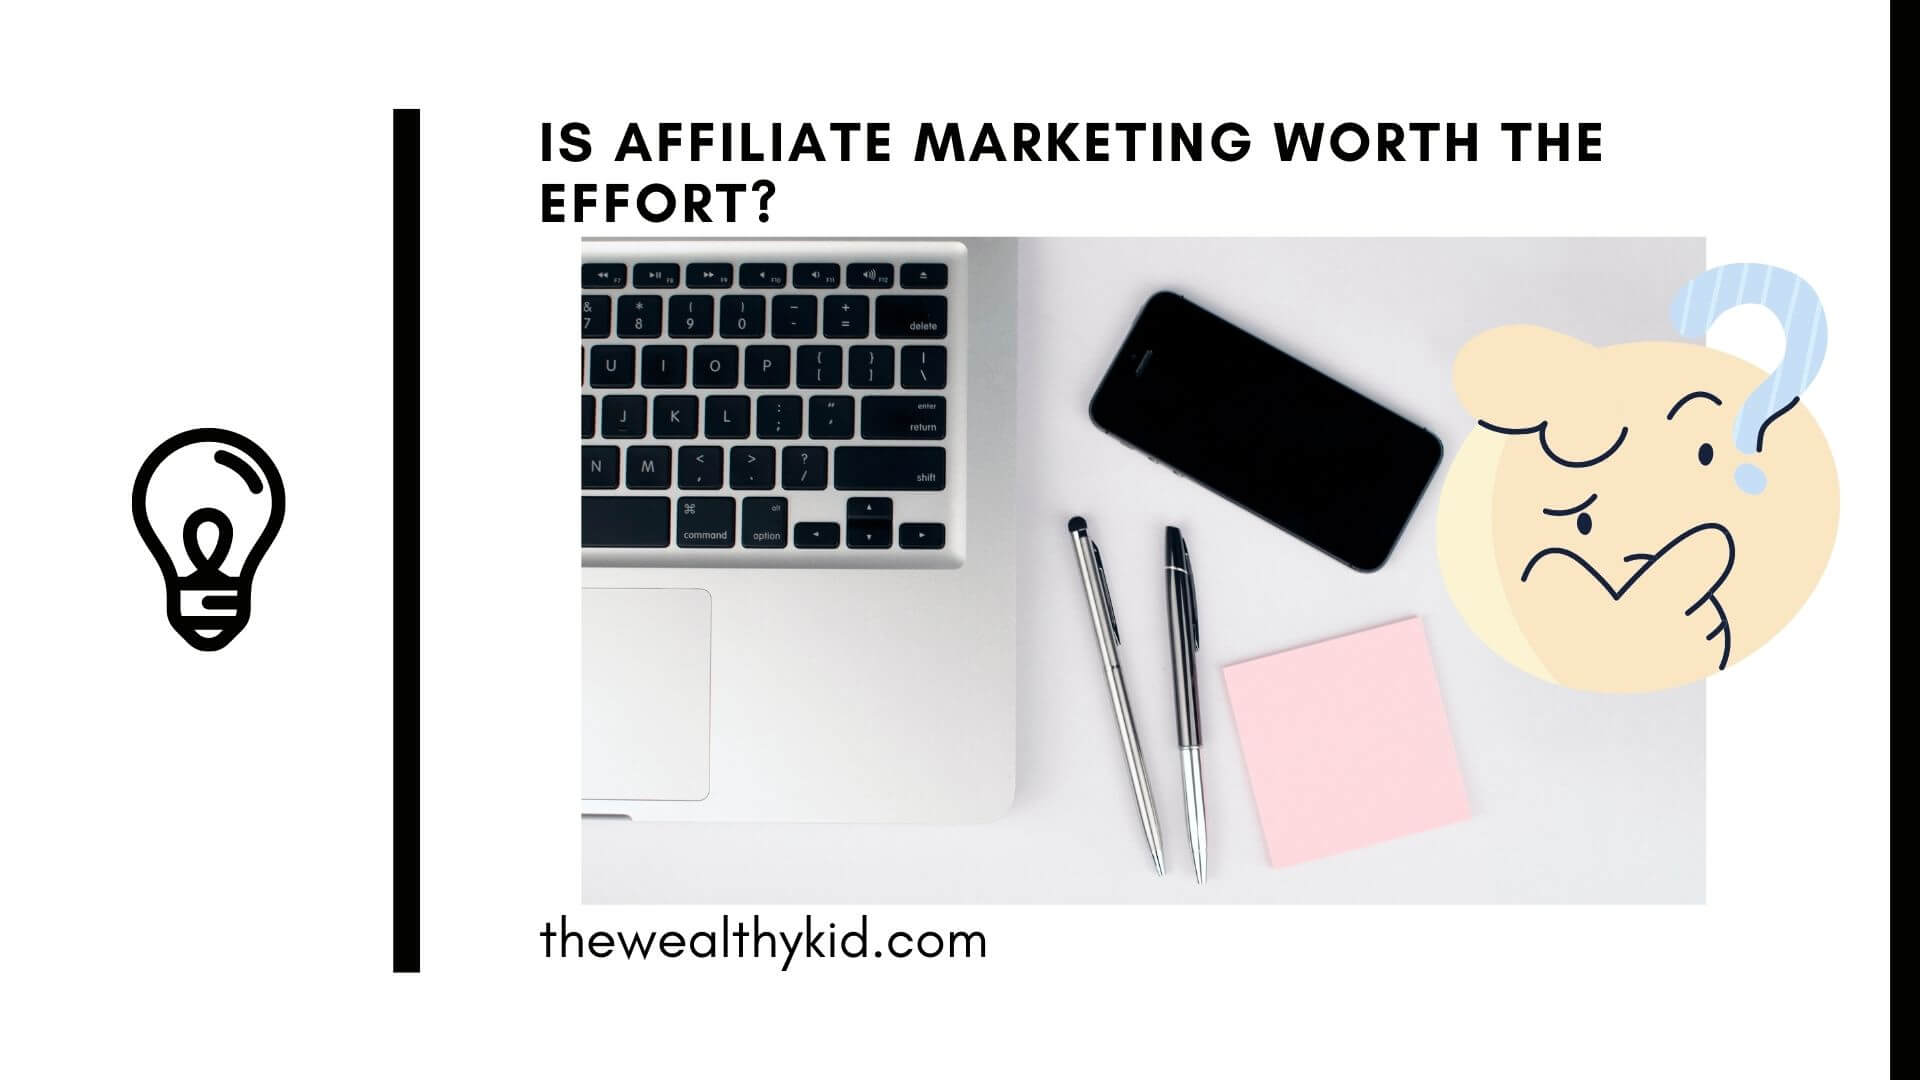 Is Affiliate Marketing Worth The Effort? Yes!